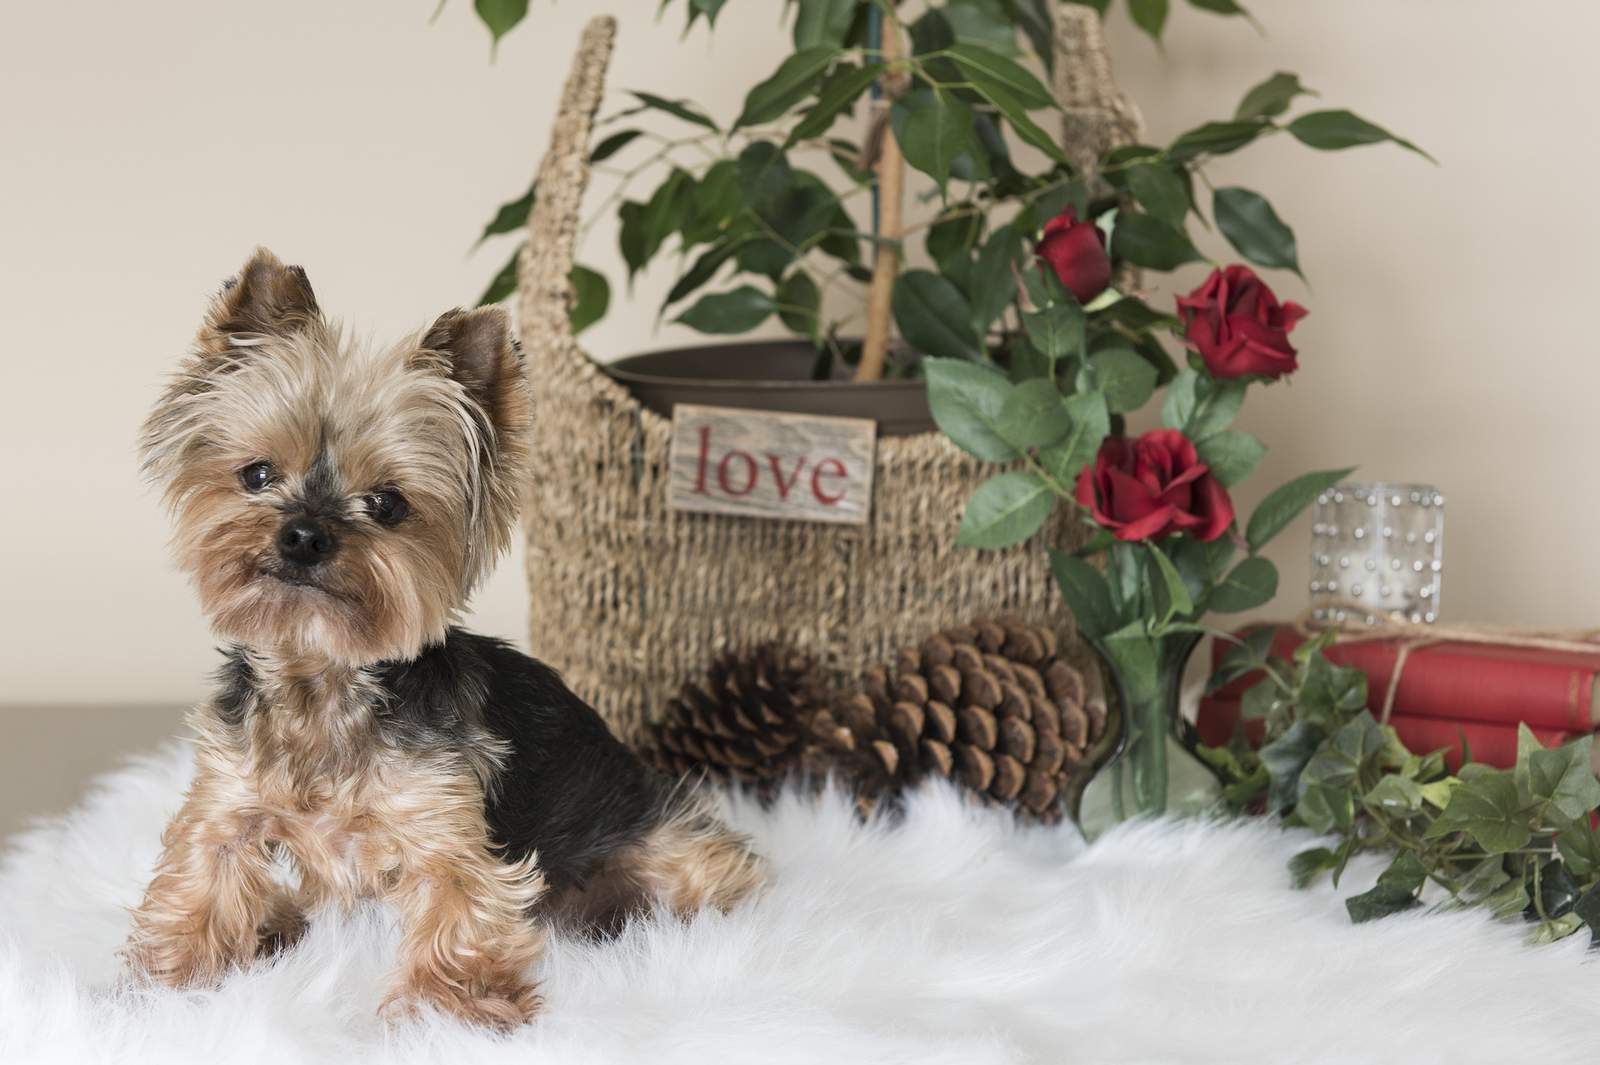 Health Alert: Avoid these Valentine’s dangers for your pets